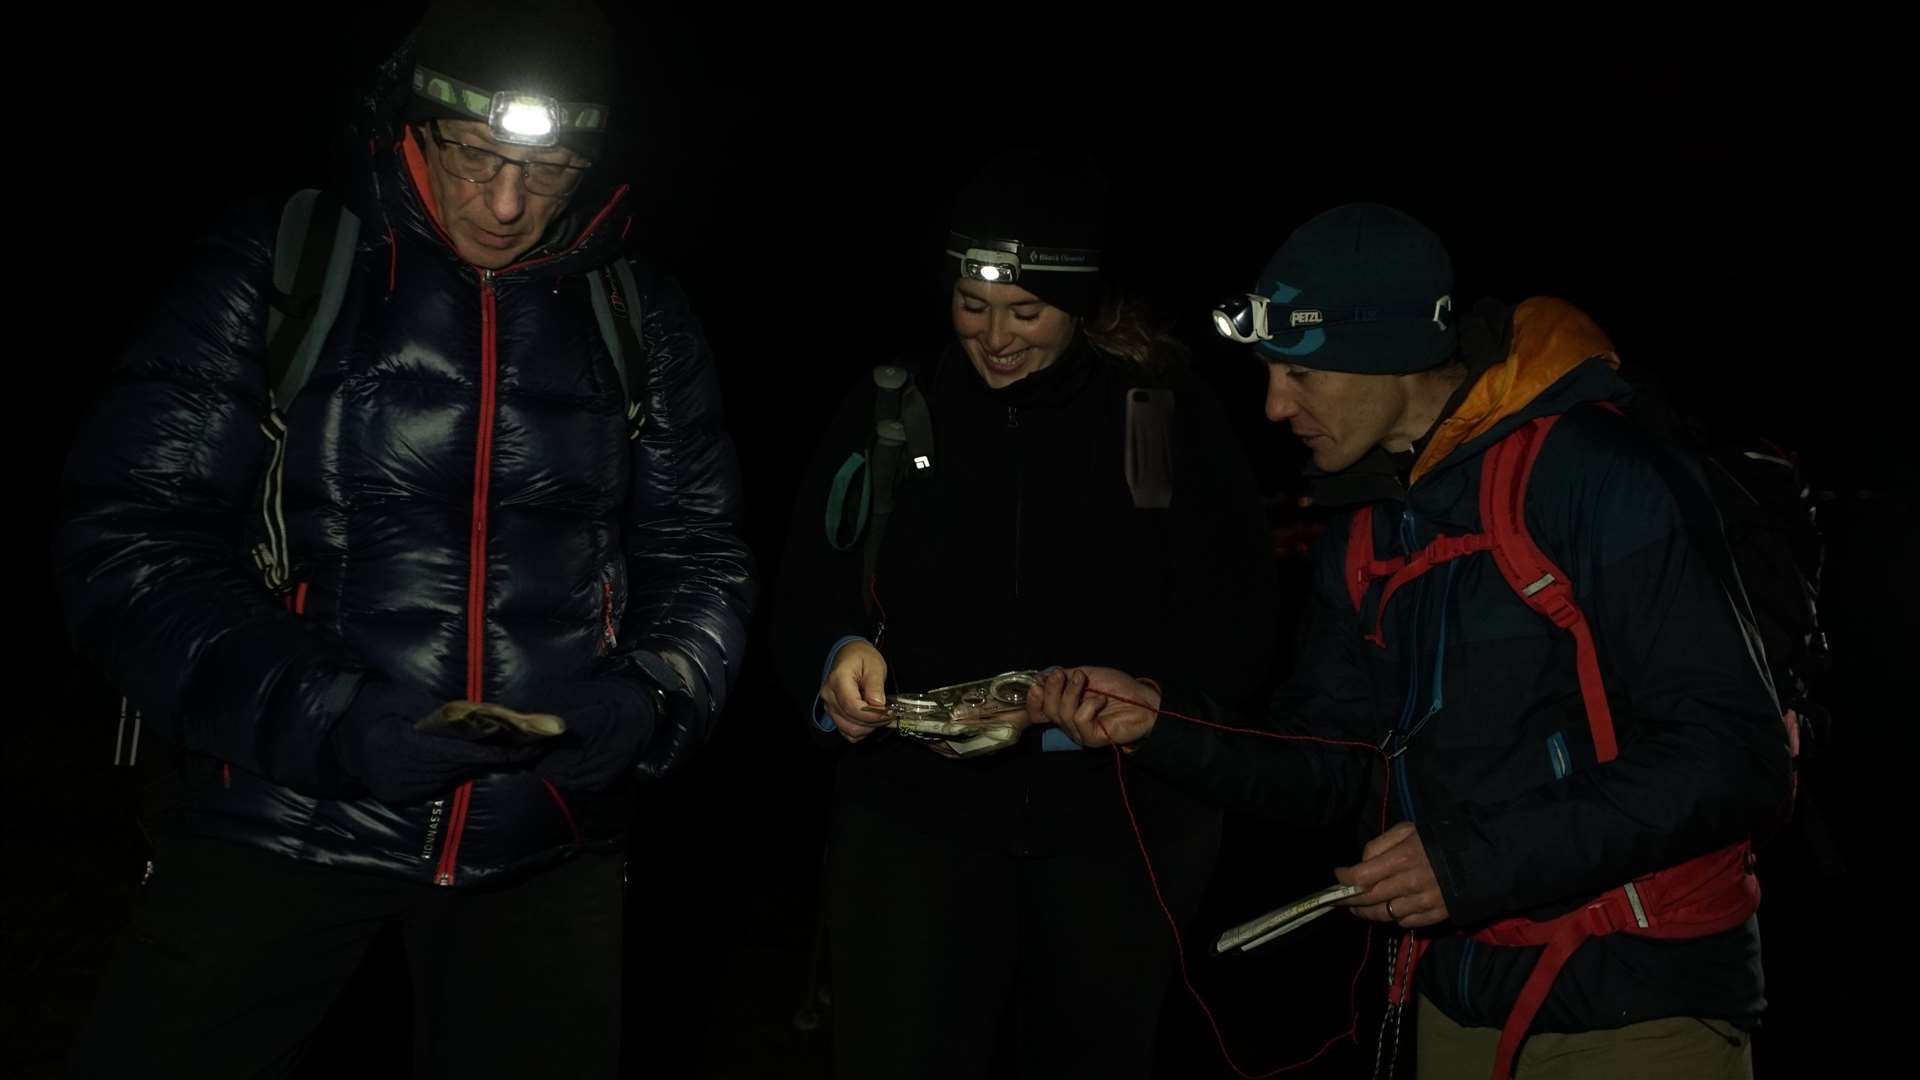 Navigating off the hill in darkness. Head torches are an essential piece of kit. Picture: Paul Diffley